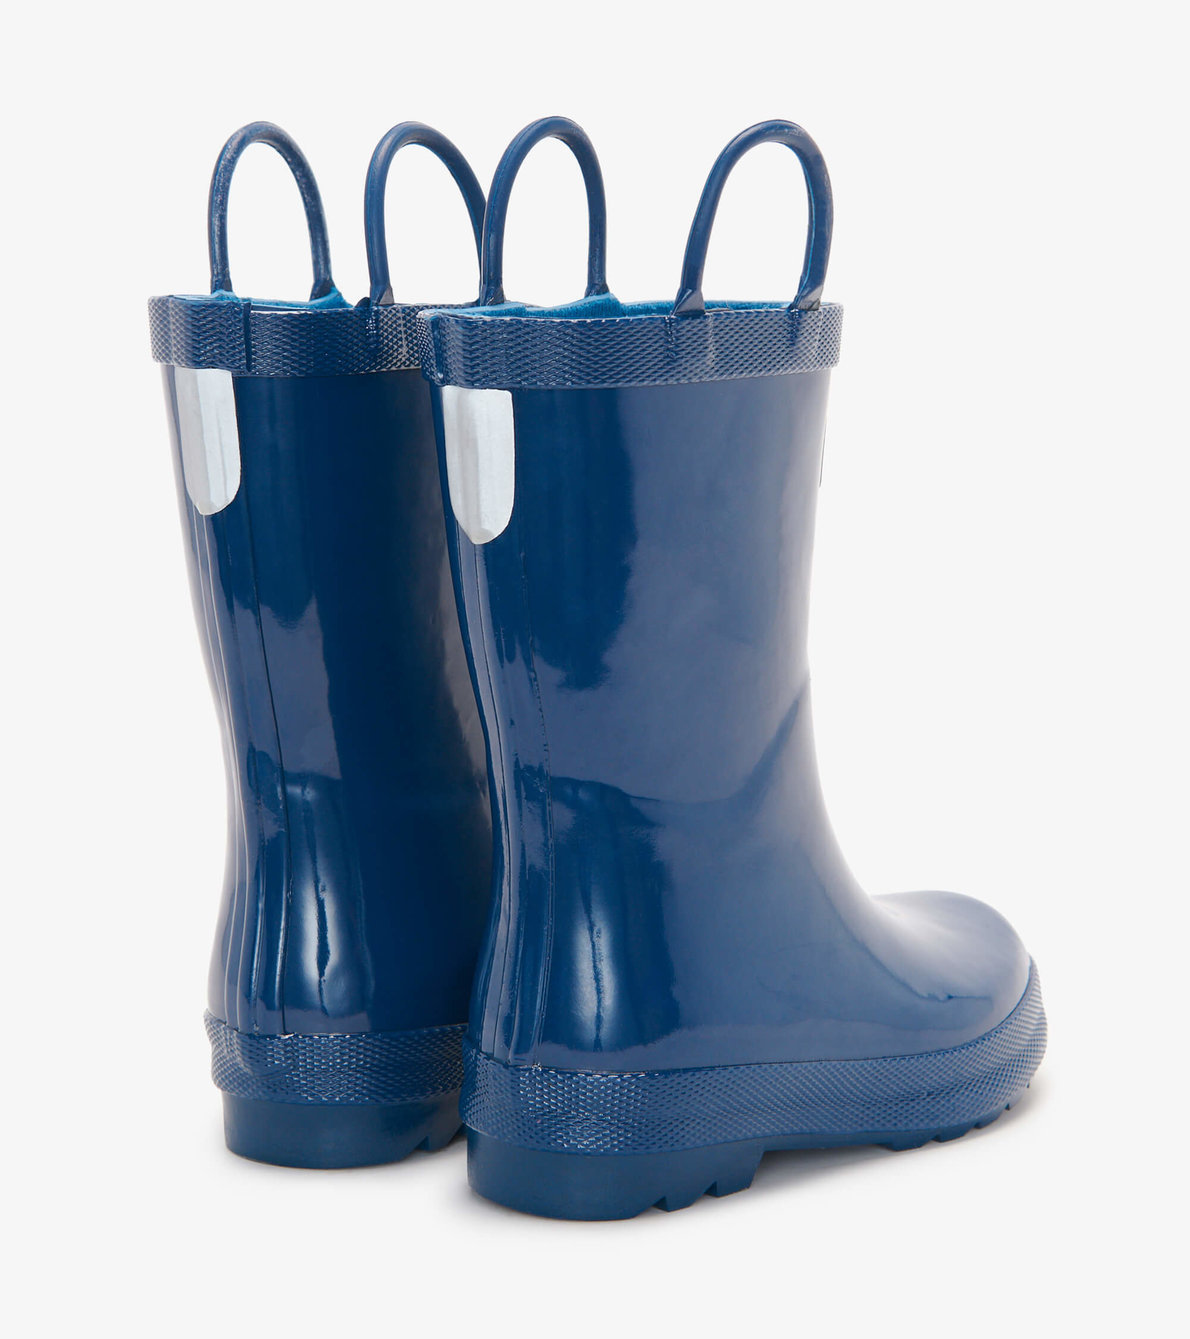 View larger image of Navy Shiny Rain Boots